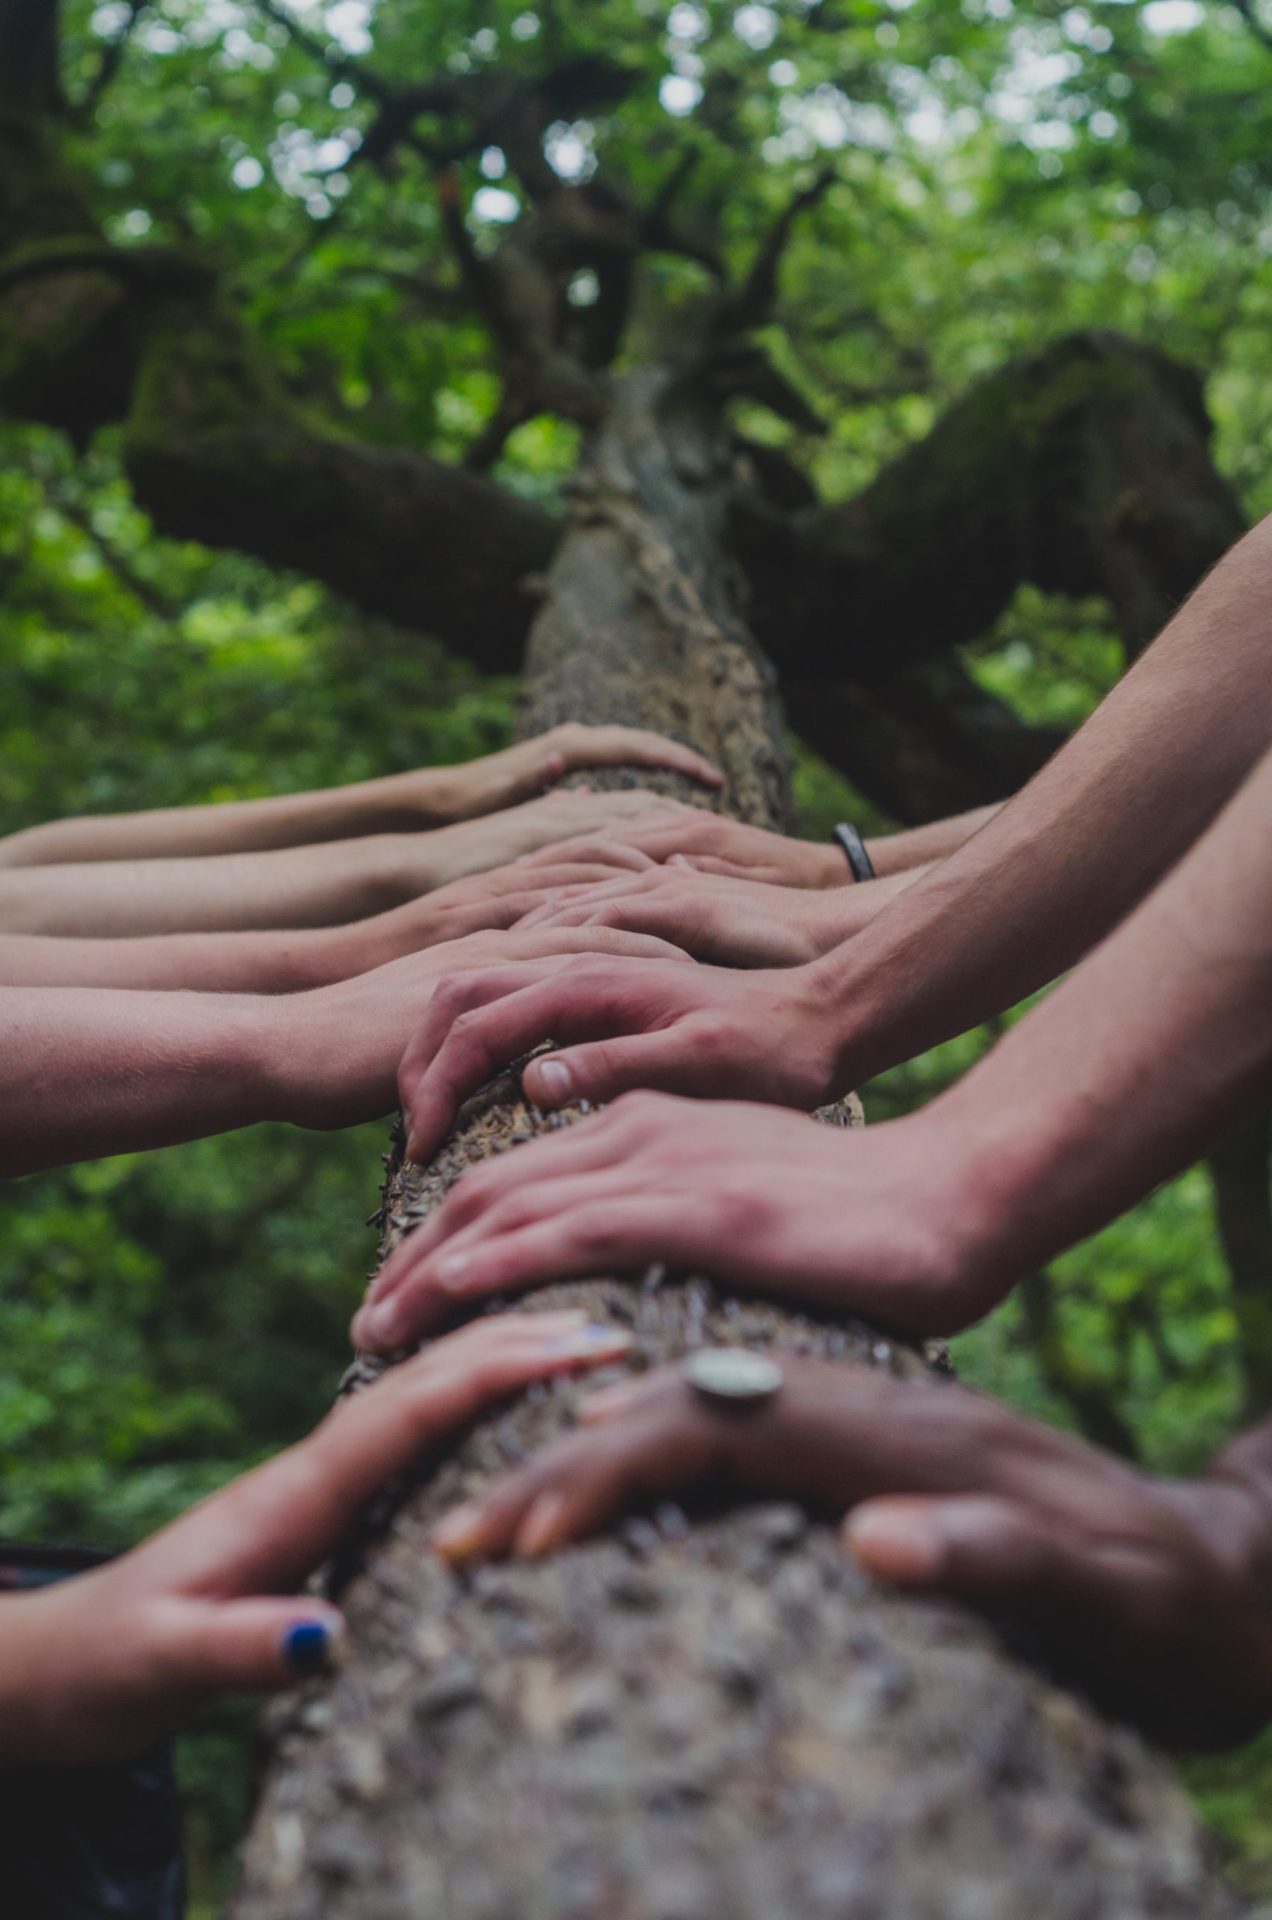 Many hands on a tree, symbolizing Reconciliation After Violent Conflict